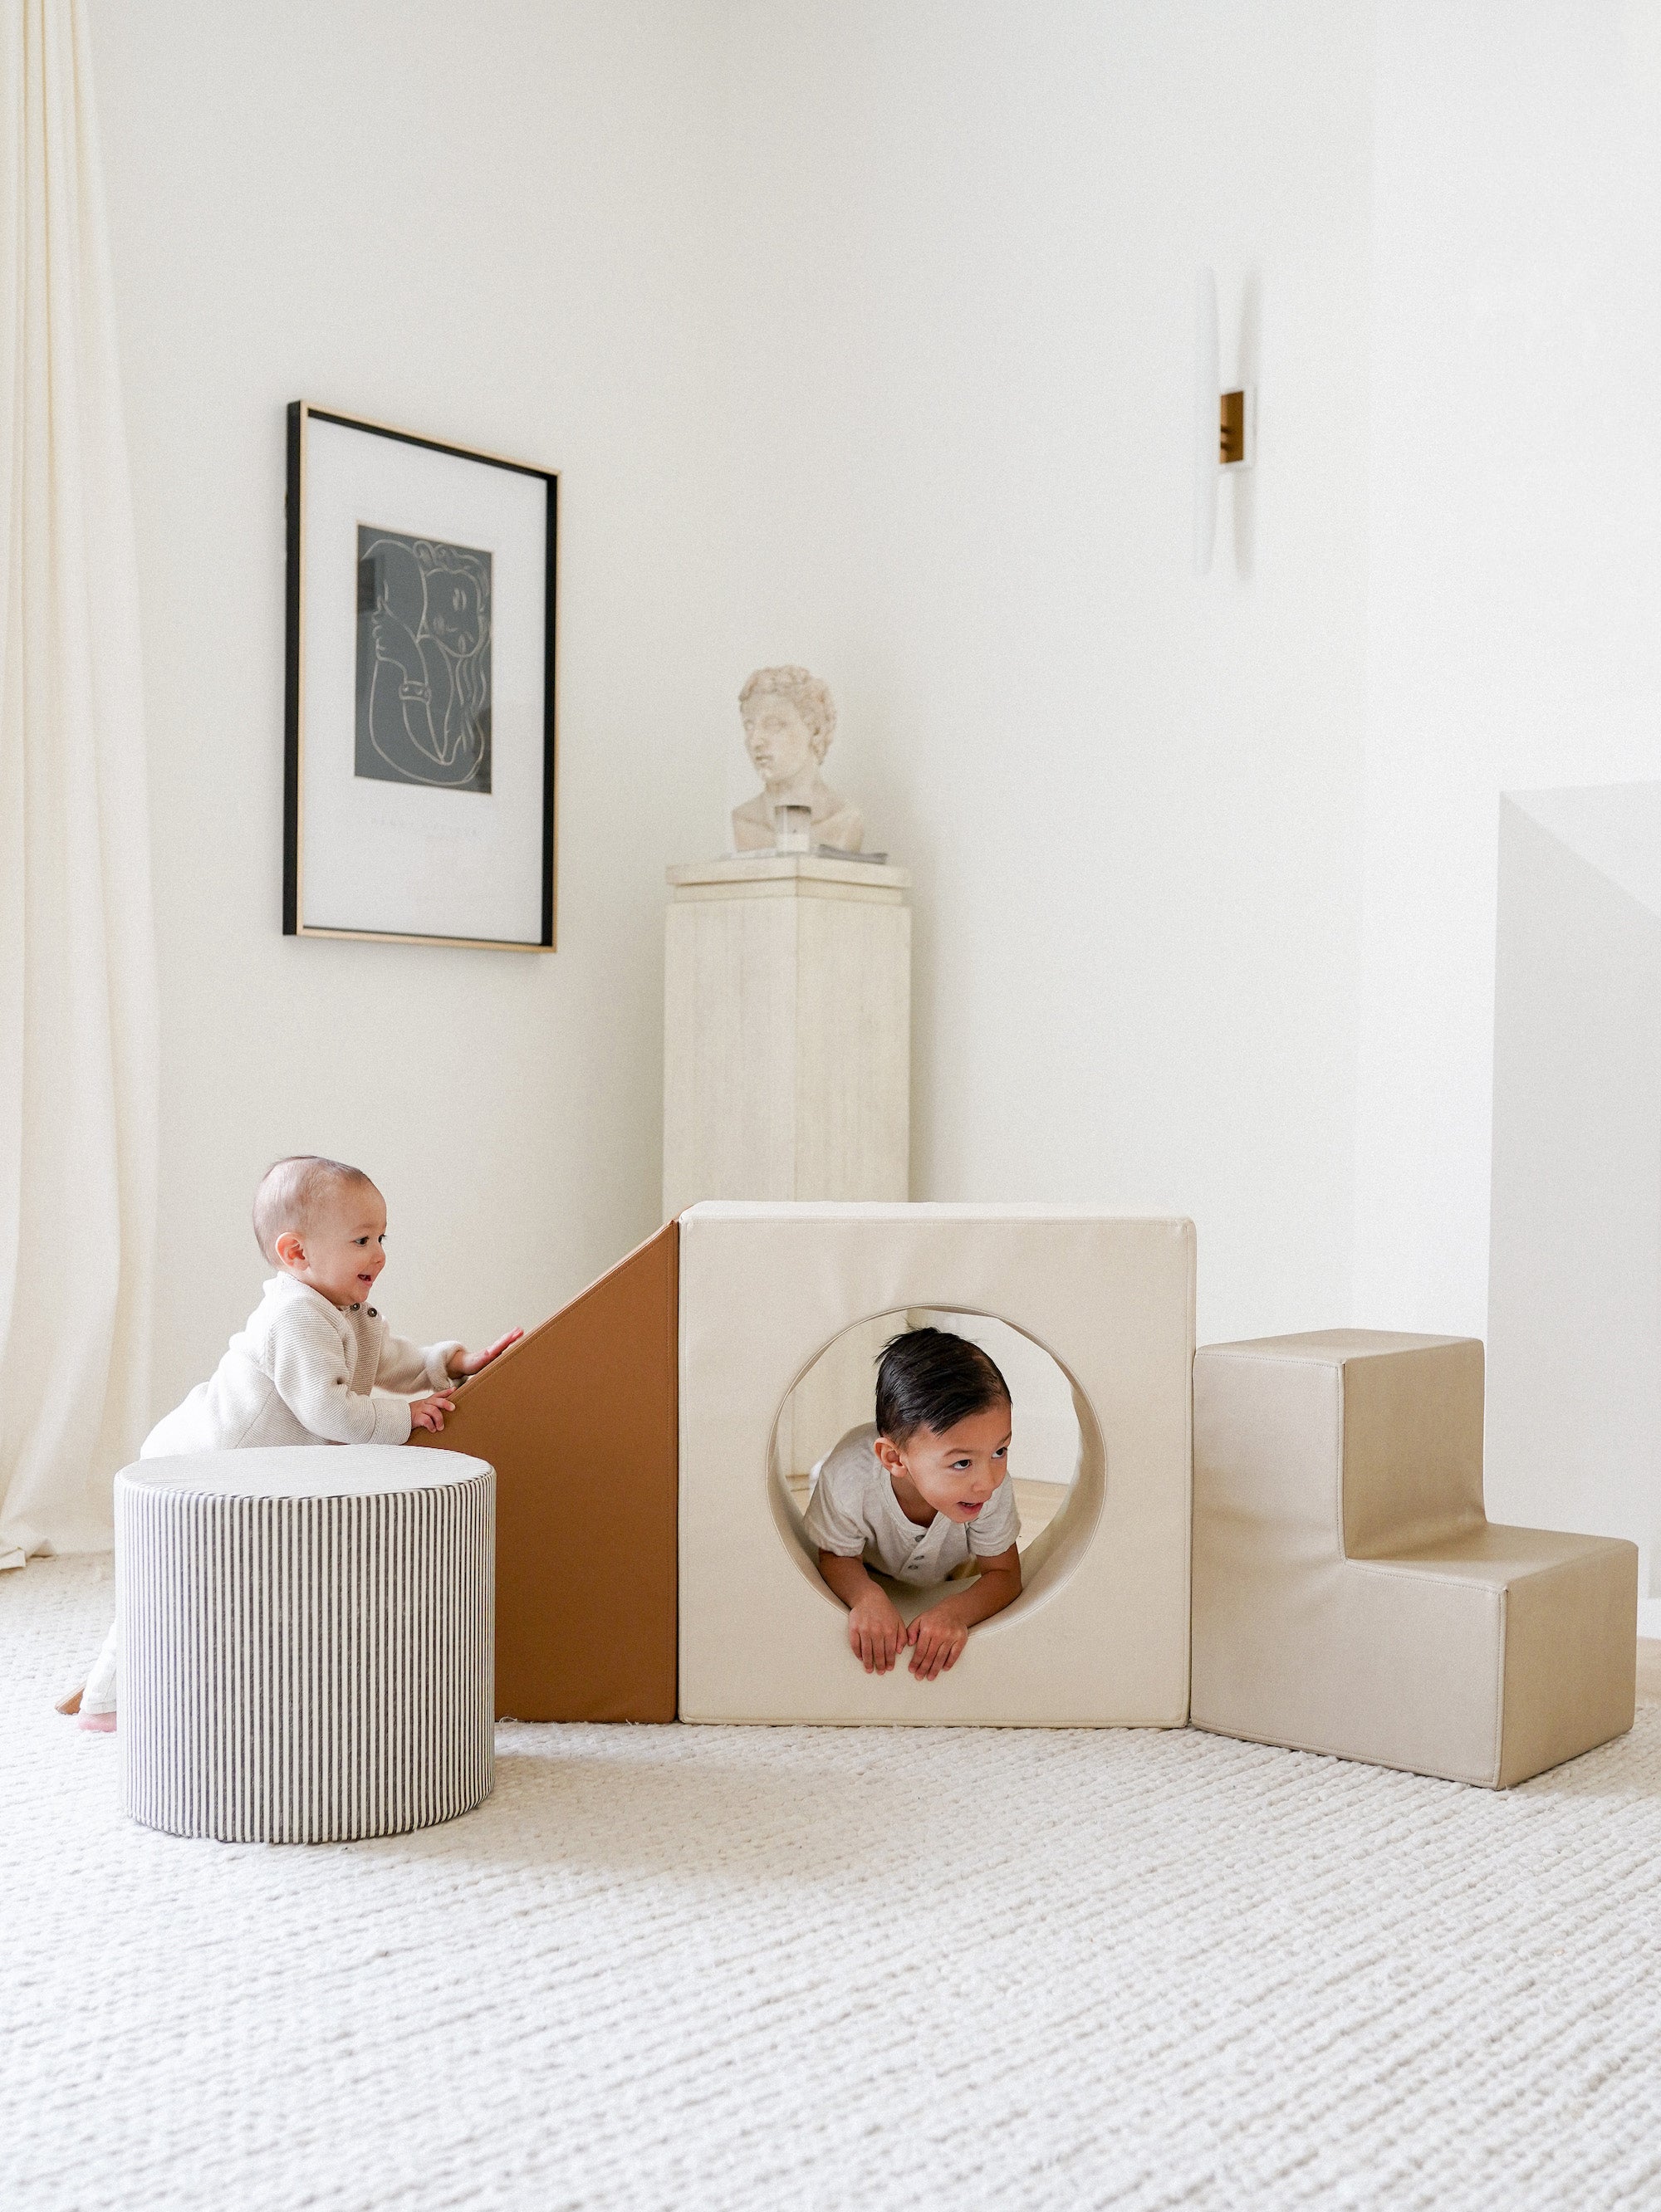 Kids playing with the Camel Block Playset.